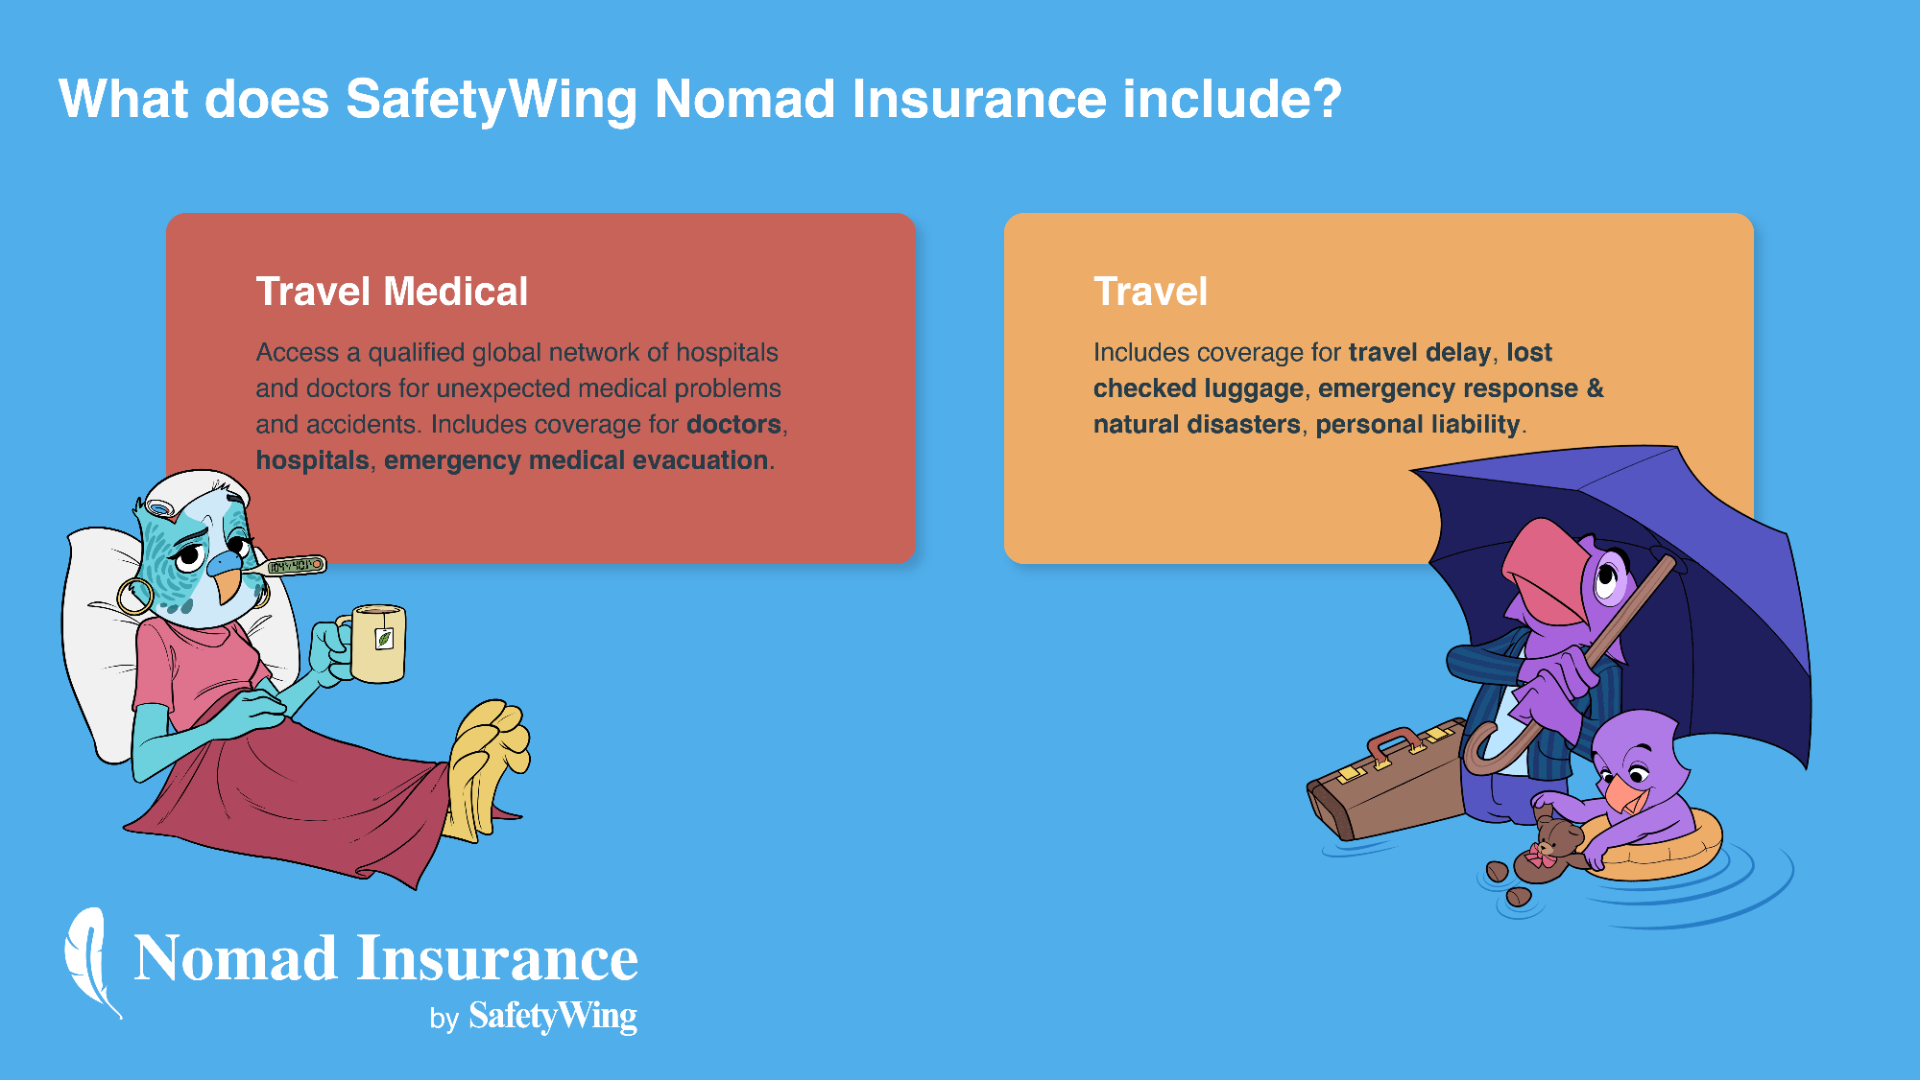 Travel Medical Insurance is something you have to pay for yourself as a self-employed nomad so I chose an insurance that is reasonably priced at $40 per 28 days